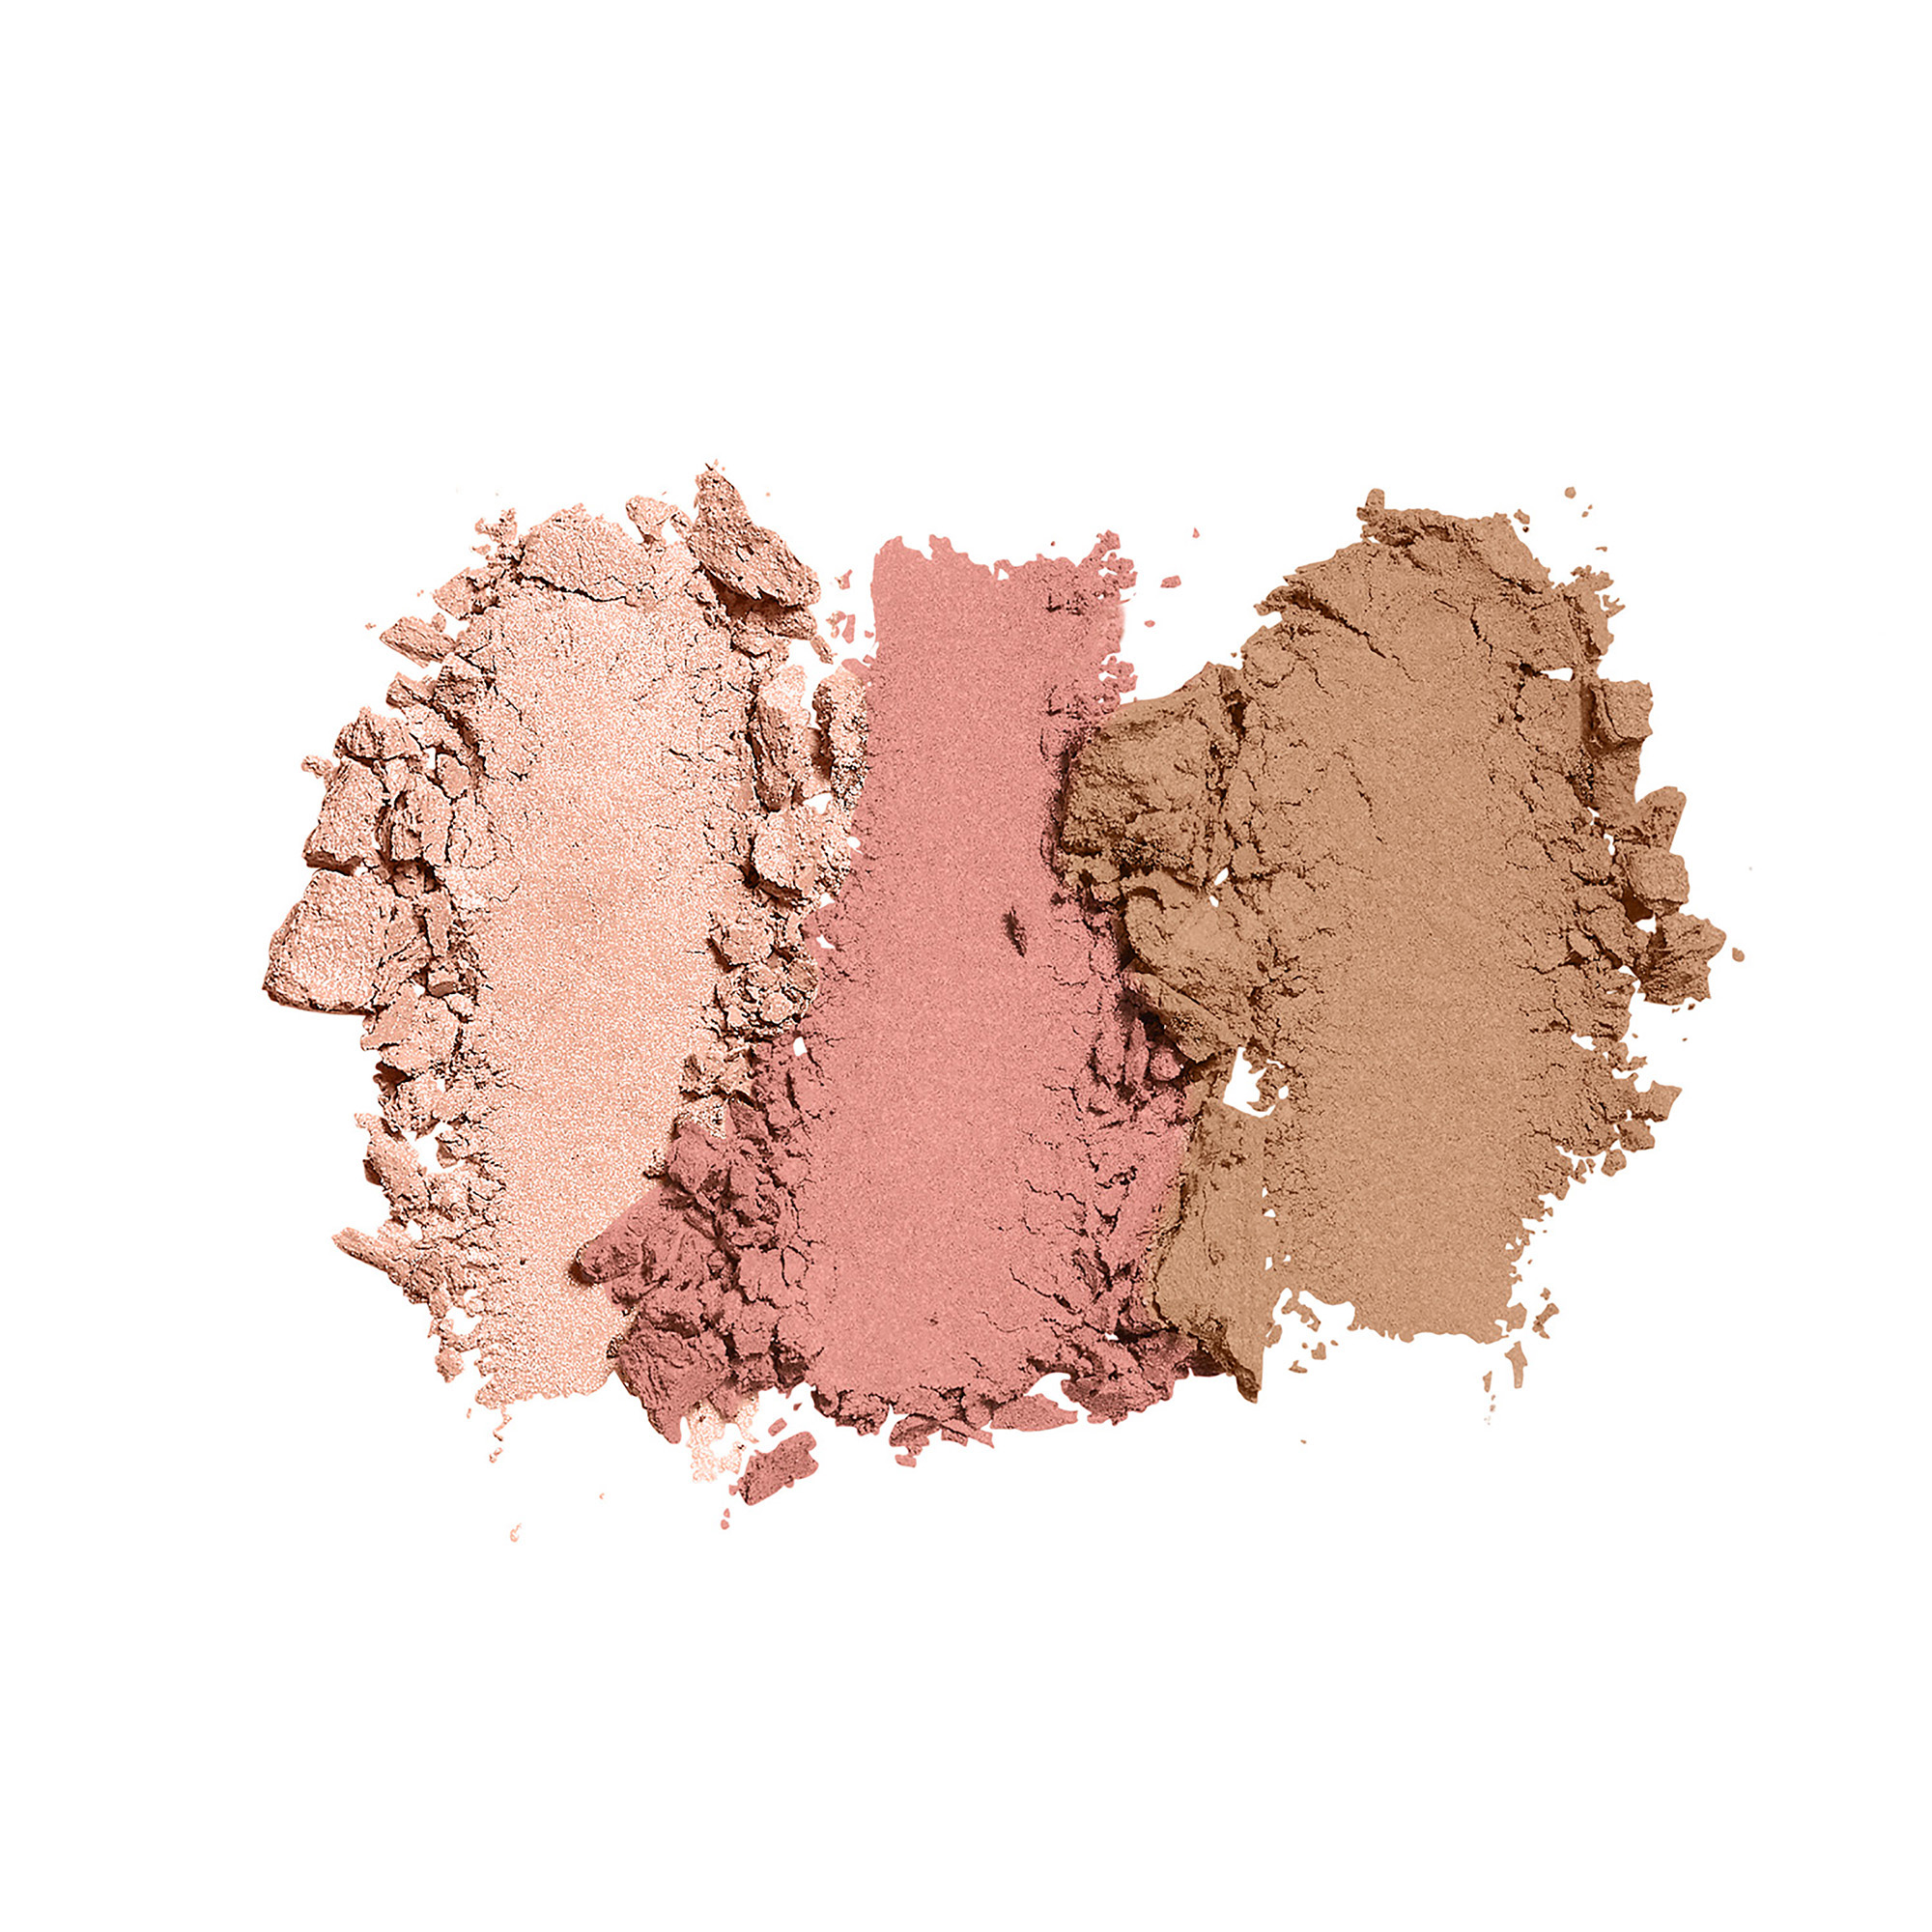 COVERGIRL Peach Scented Collection, Peach Punch Highlighter Palette - image 2 of 4